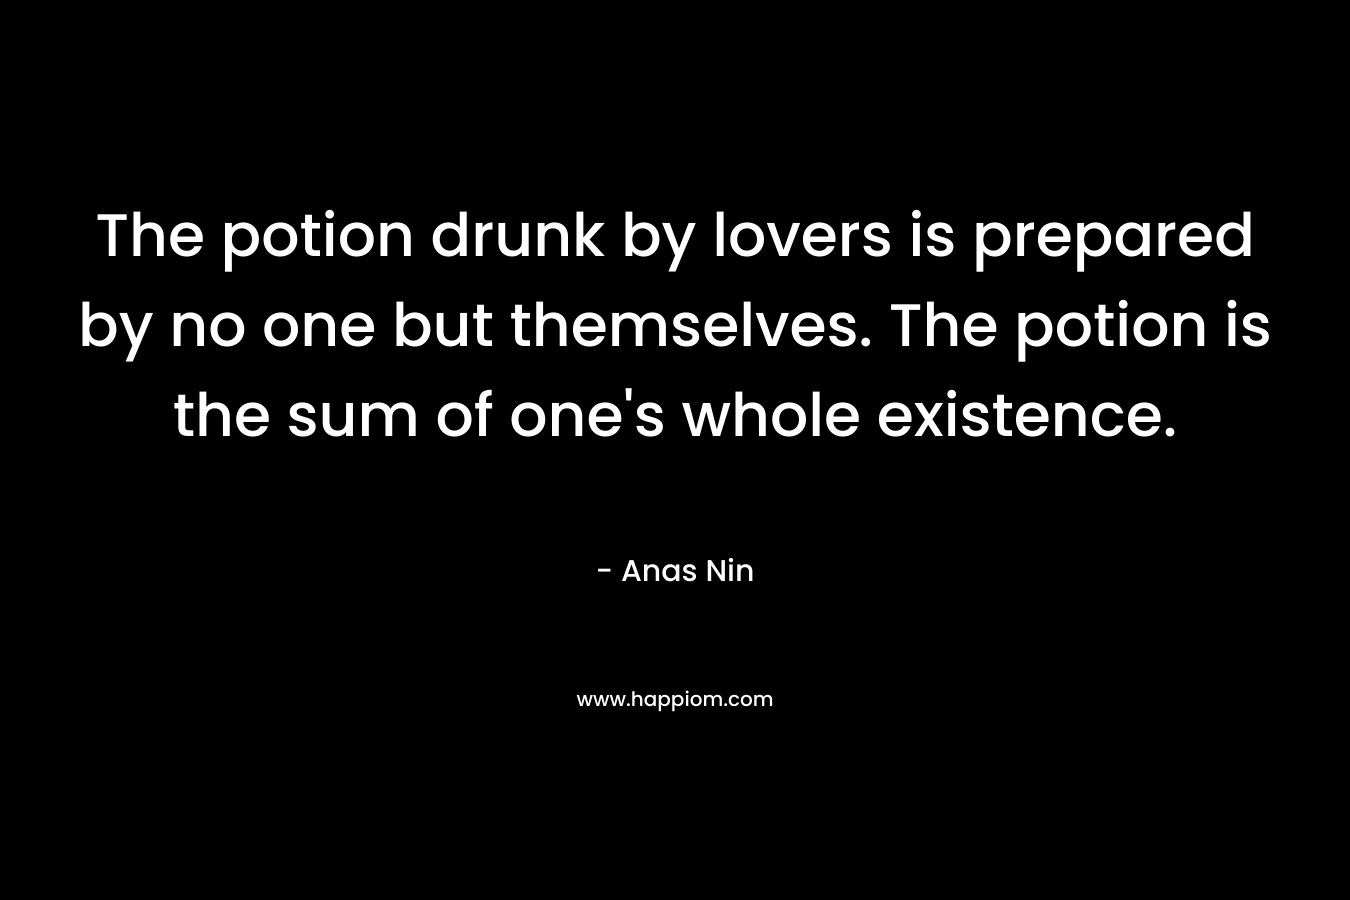 The potion drunk by lovers is prepared by no one but themselves. The potion is the sum of one’s whole existence. – Anas Nin